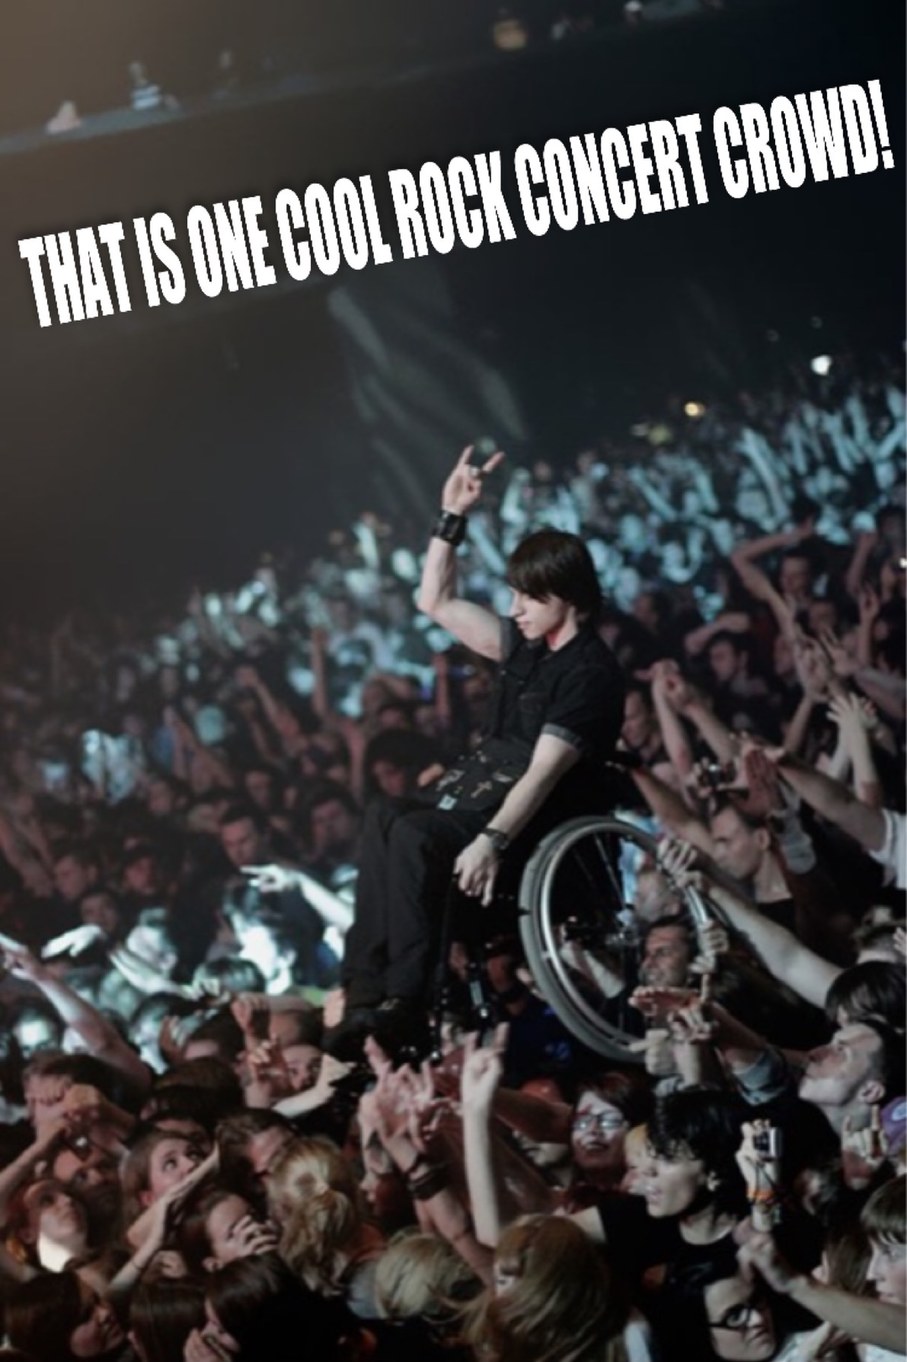 This is the ultimate in cool rock concert crowds! - meme